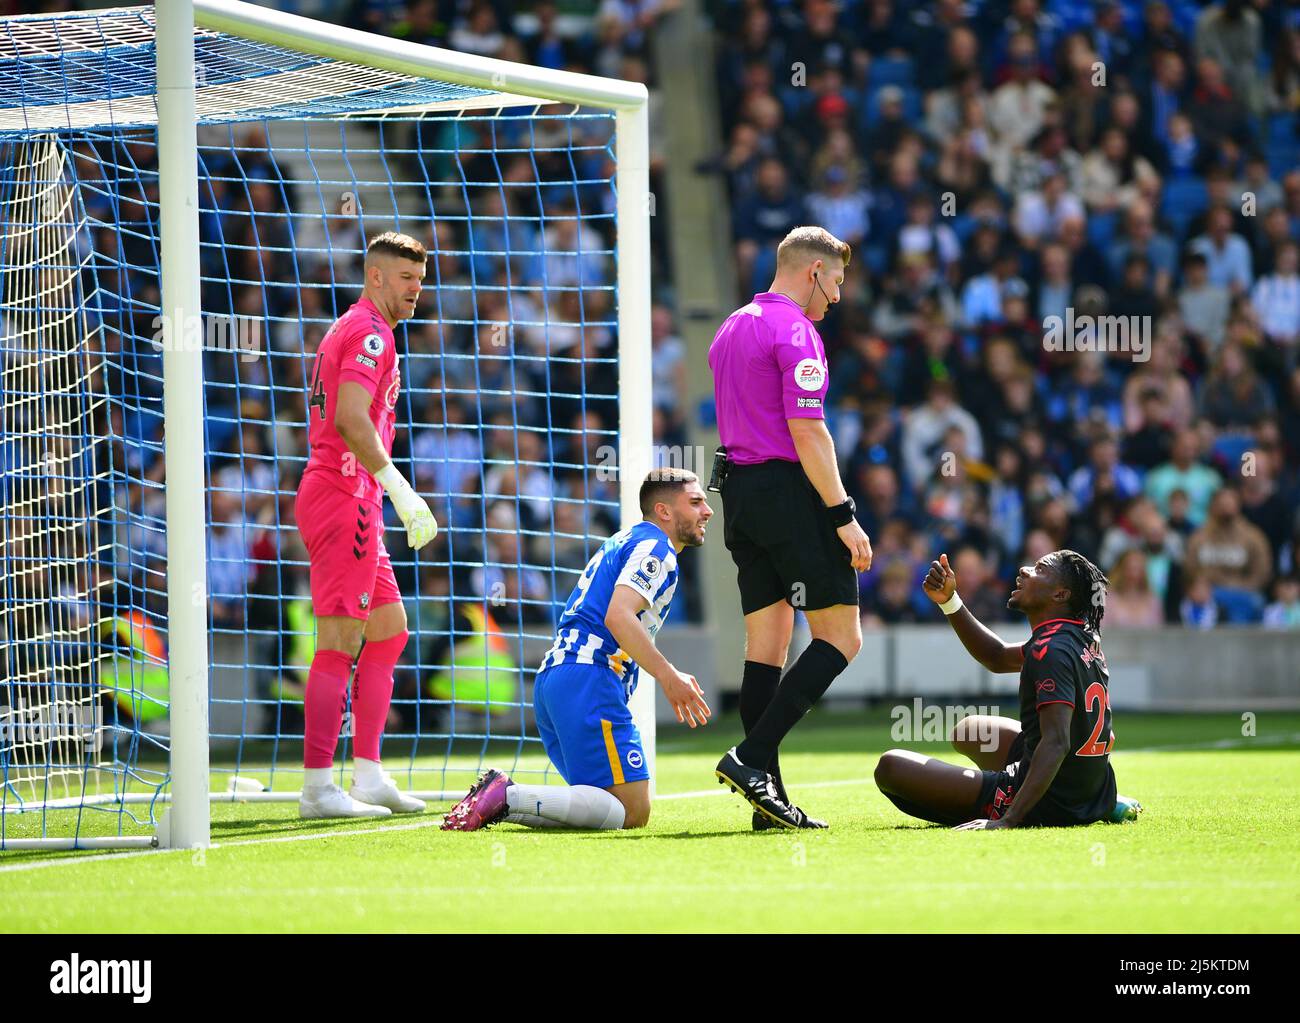 Brighton, UK. 24th Apr, 2022. Mohammed Salisu of Southampton and Neal Maupay of Brighton and Hove Albion clash in the box watched on by Fraser Forster Goalkeeper of Southampton during the Premier League match between Brighton & Hove Albion and Southampton at The Amex on April 24th 2022 in Brighton, England. (Photo by Jeff Mood/phcimages.com) Credit: PHC Images/Alamy Live News Stock Photo